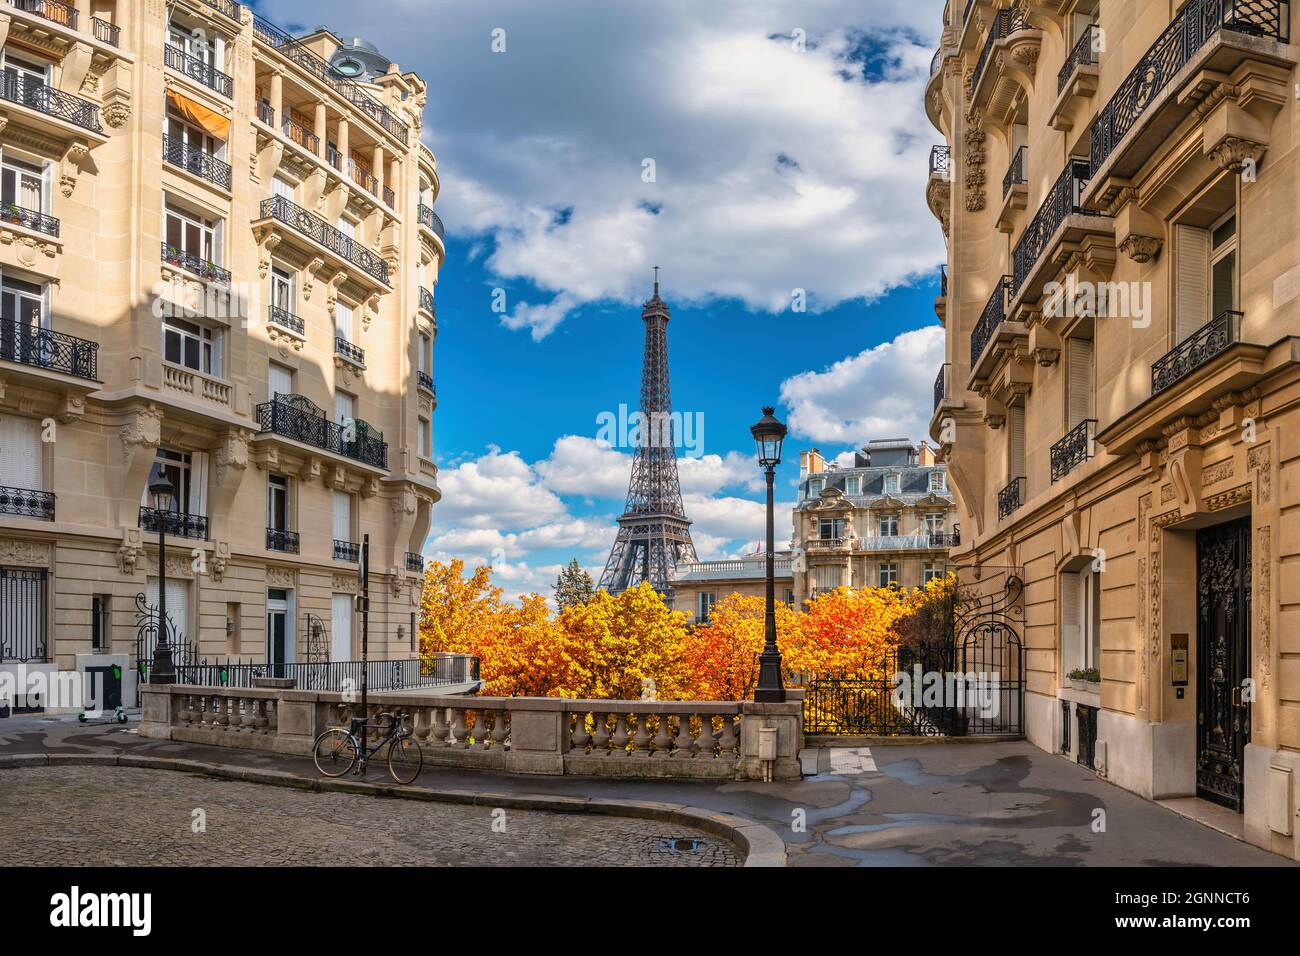 Paris France, city skyline at Eiffel Tower and old building architecture with autumn foliage season Stock Photo